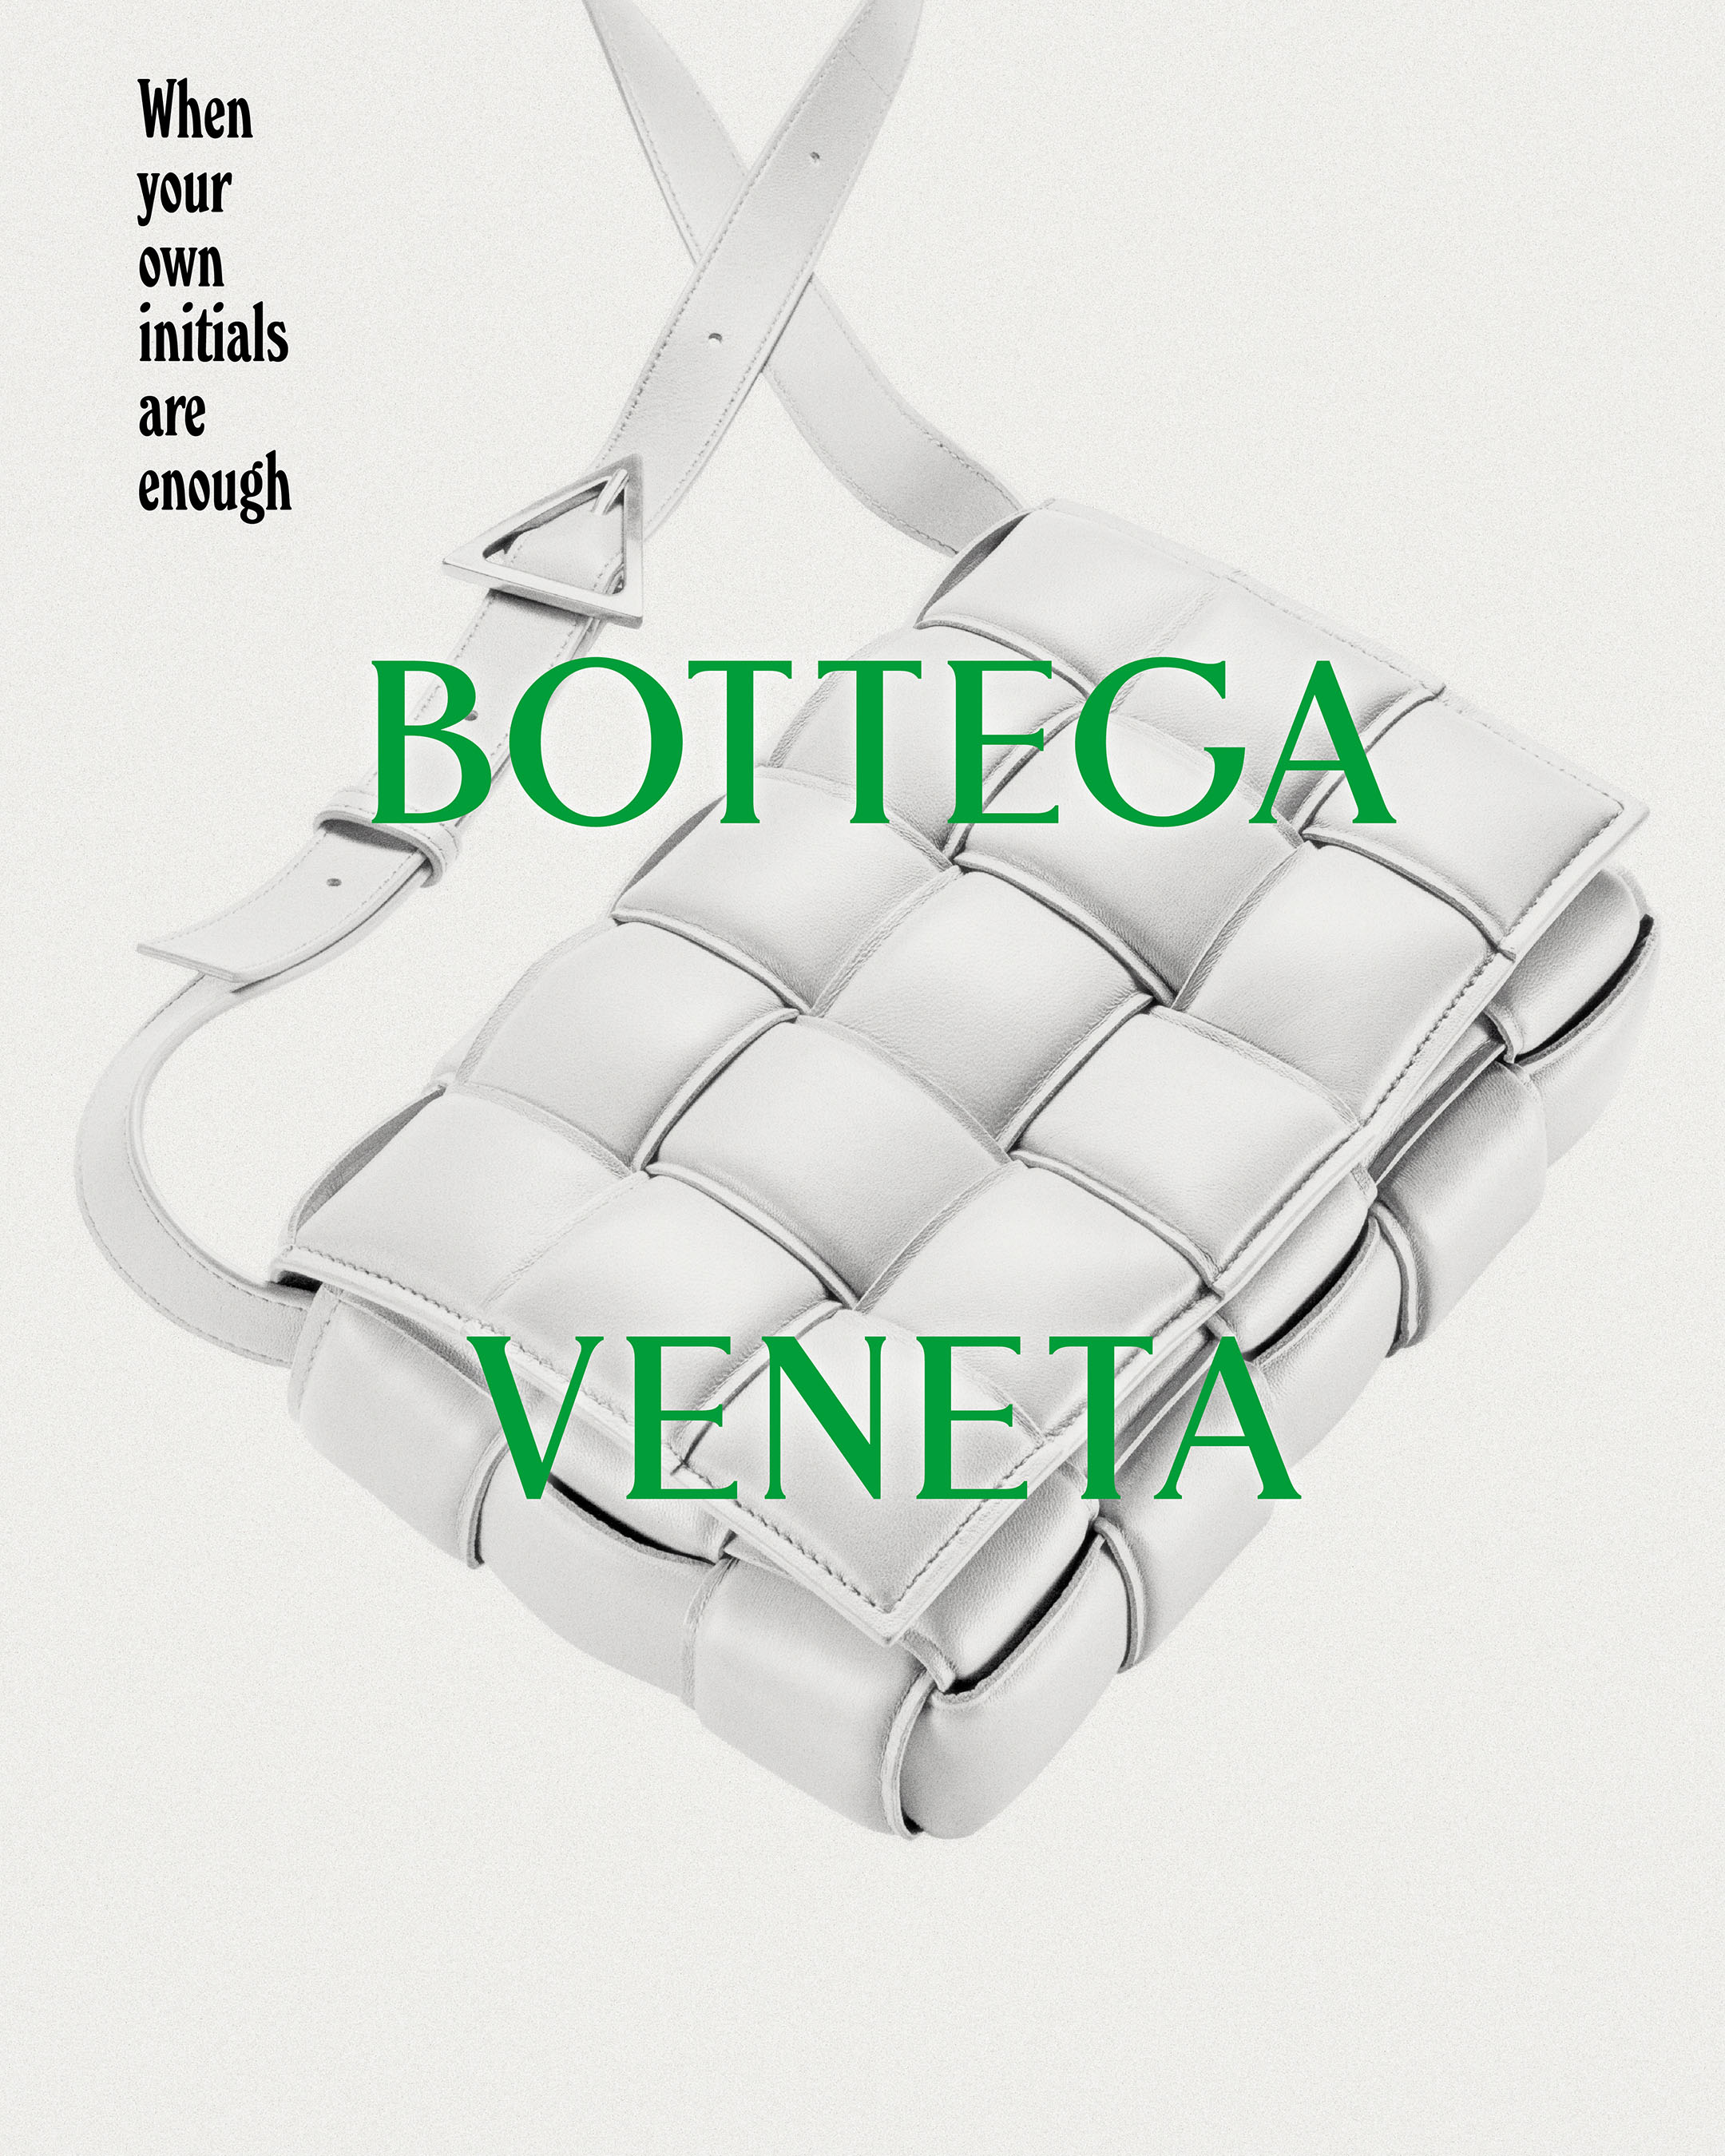 The campaign of padded boxes by Bottega Veneta